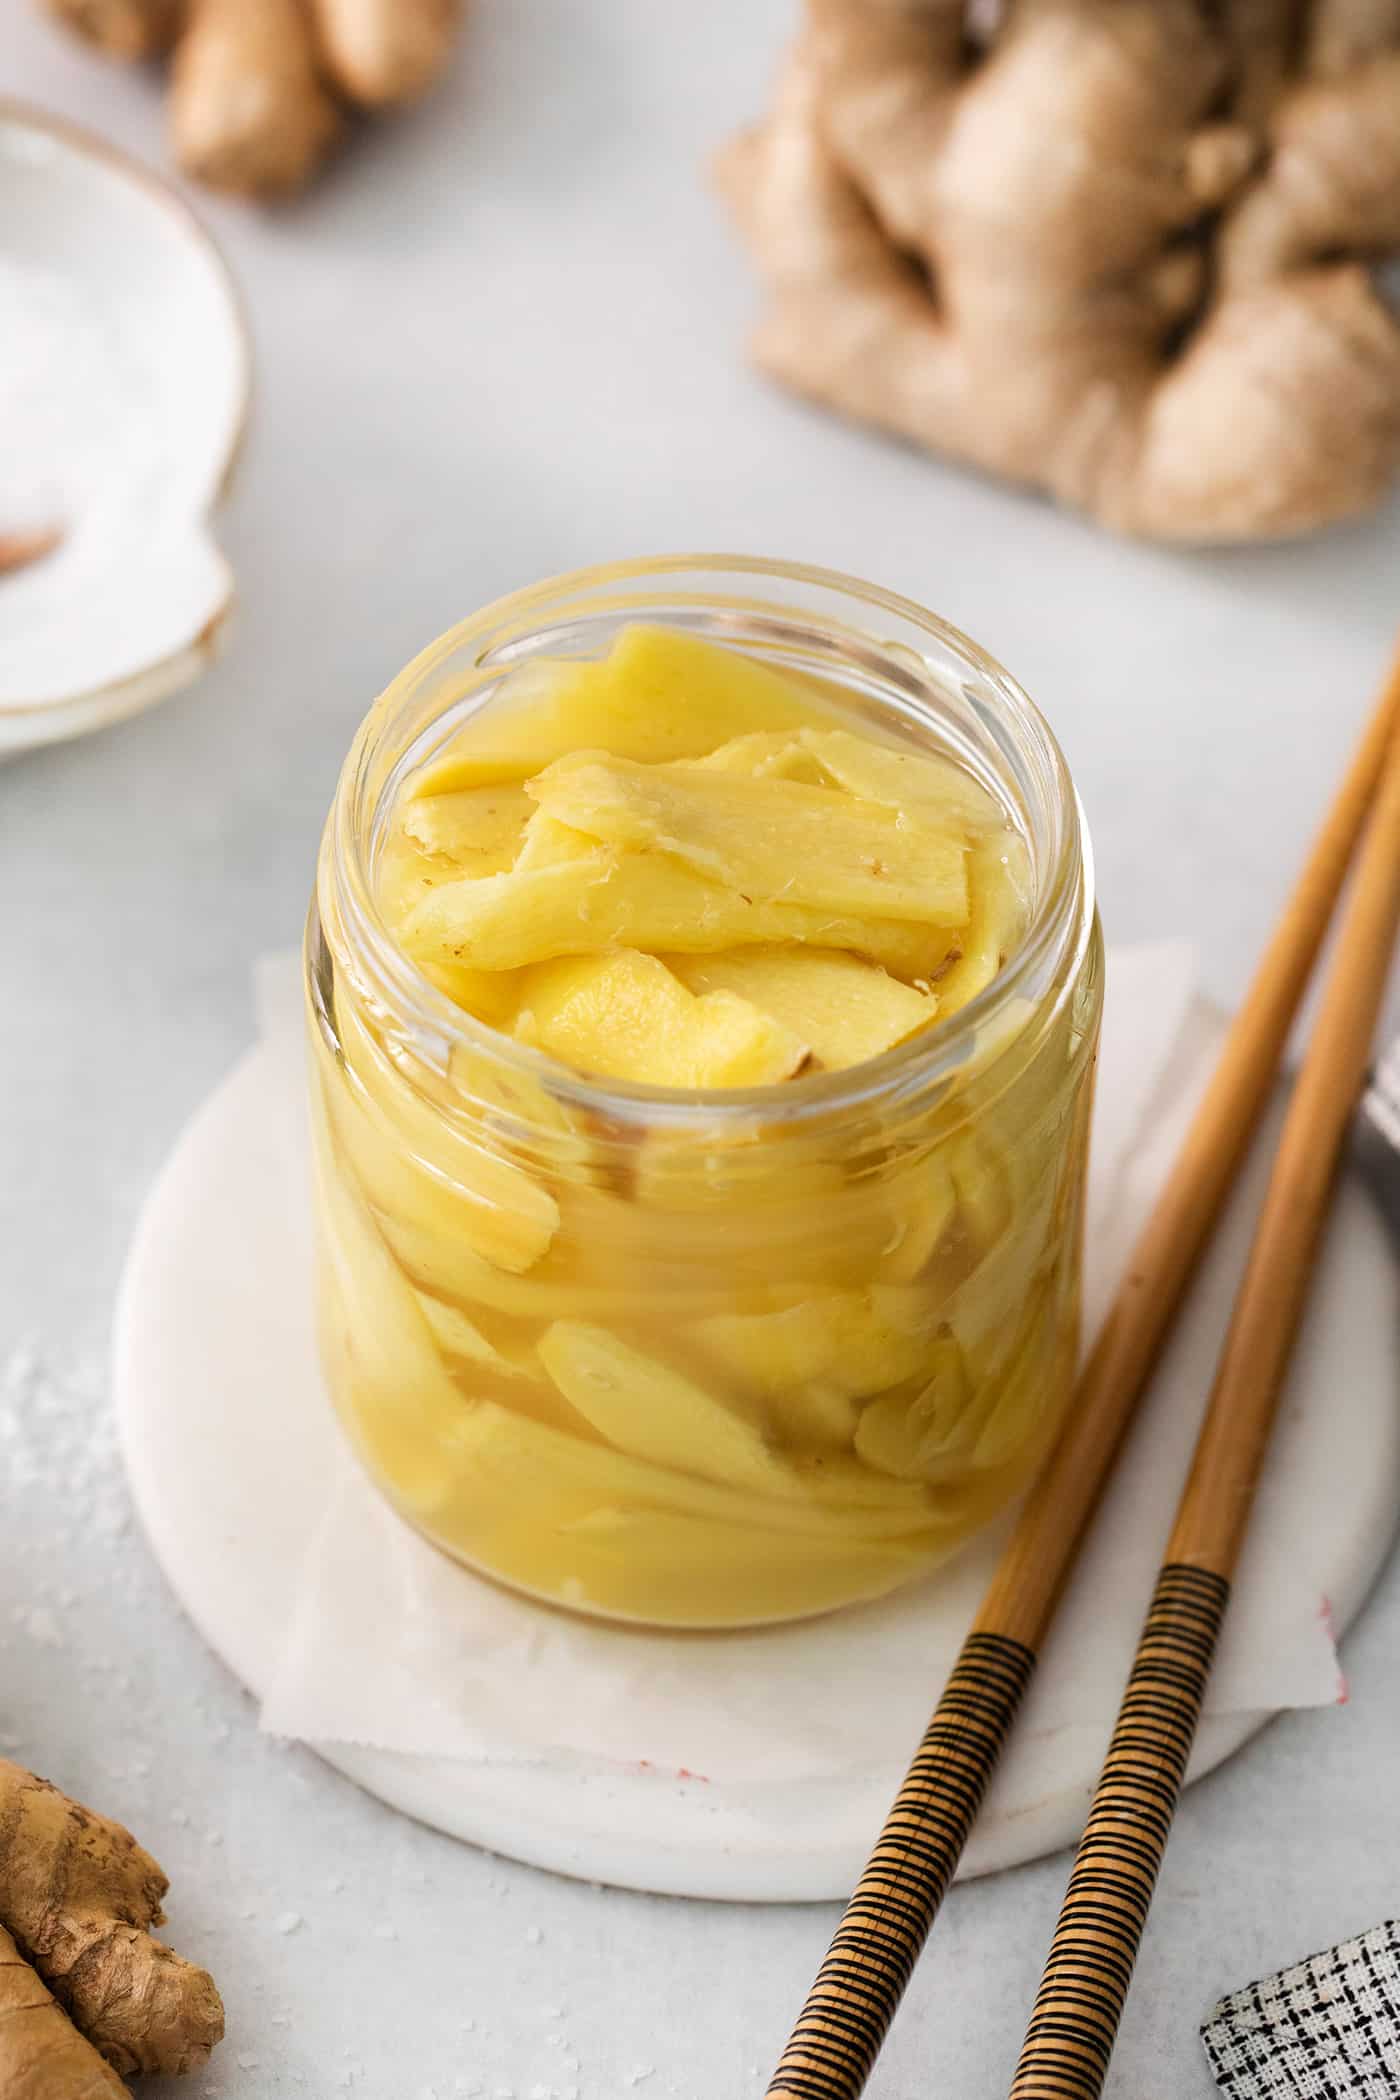 A jar of pickled ginger on a white plate with chopsticks next to it.